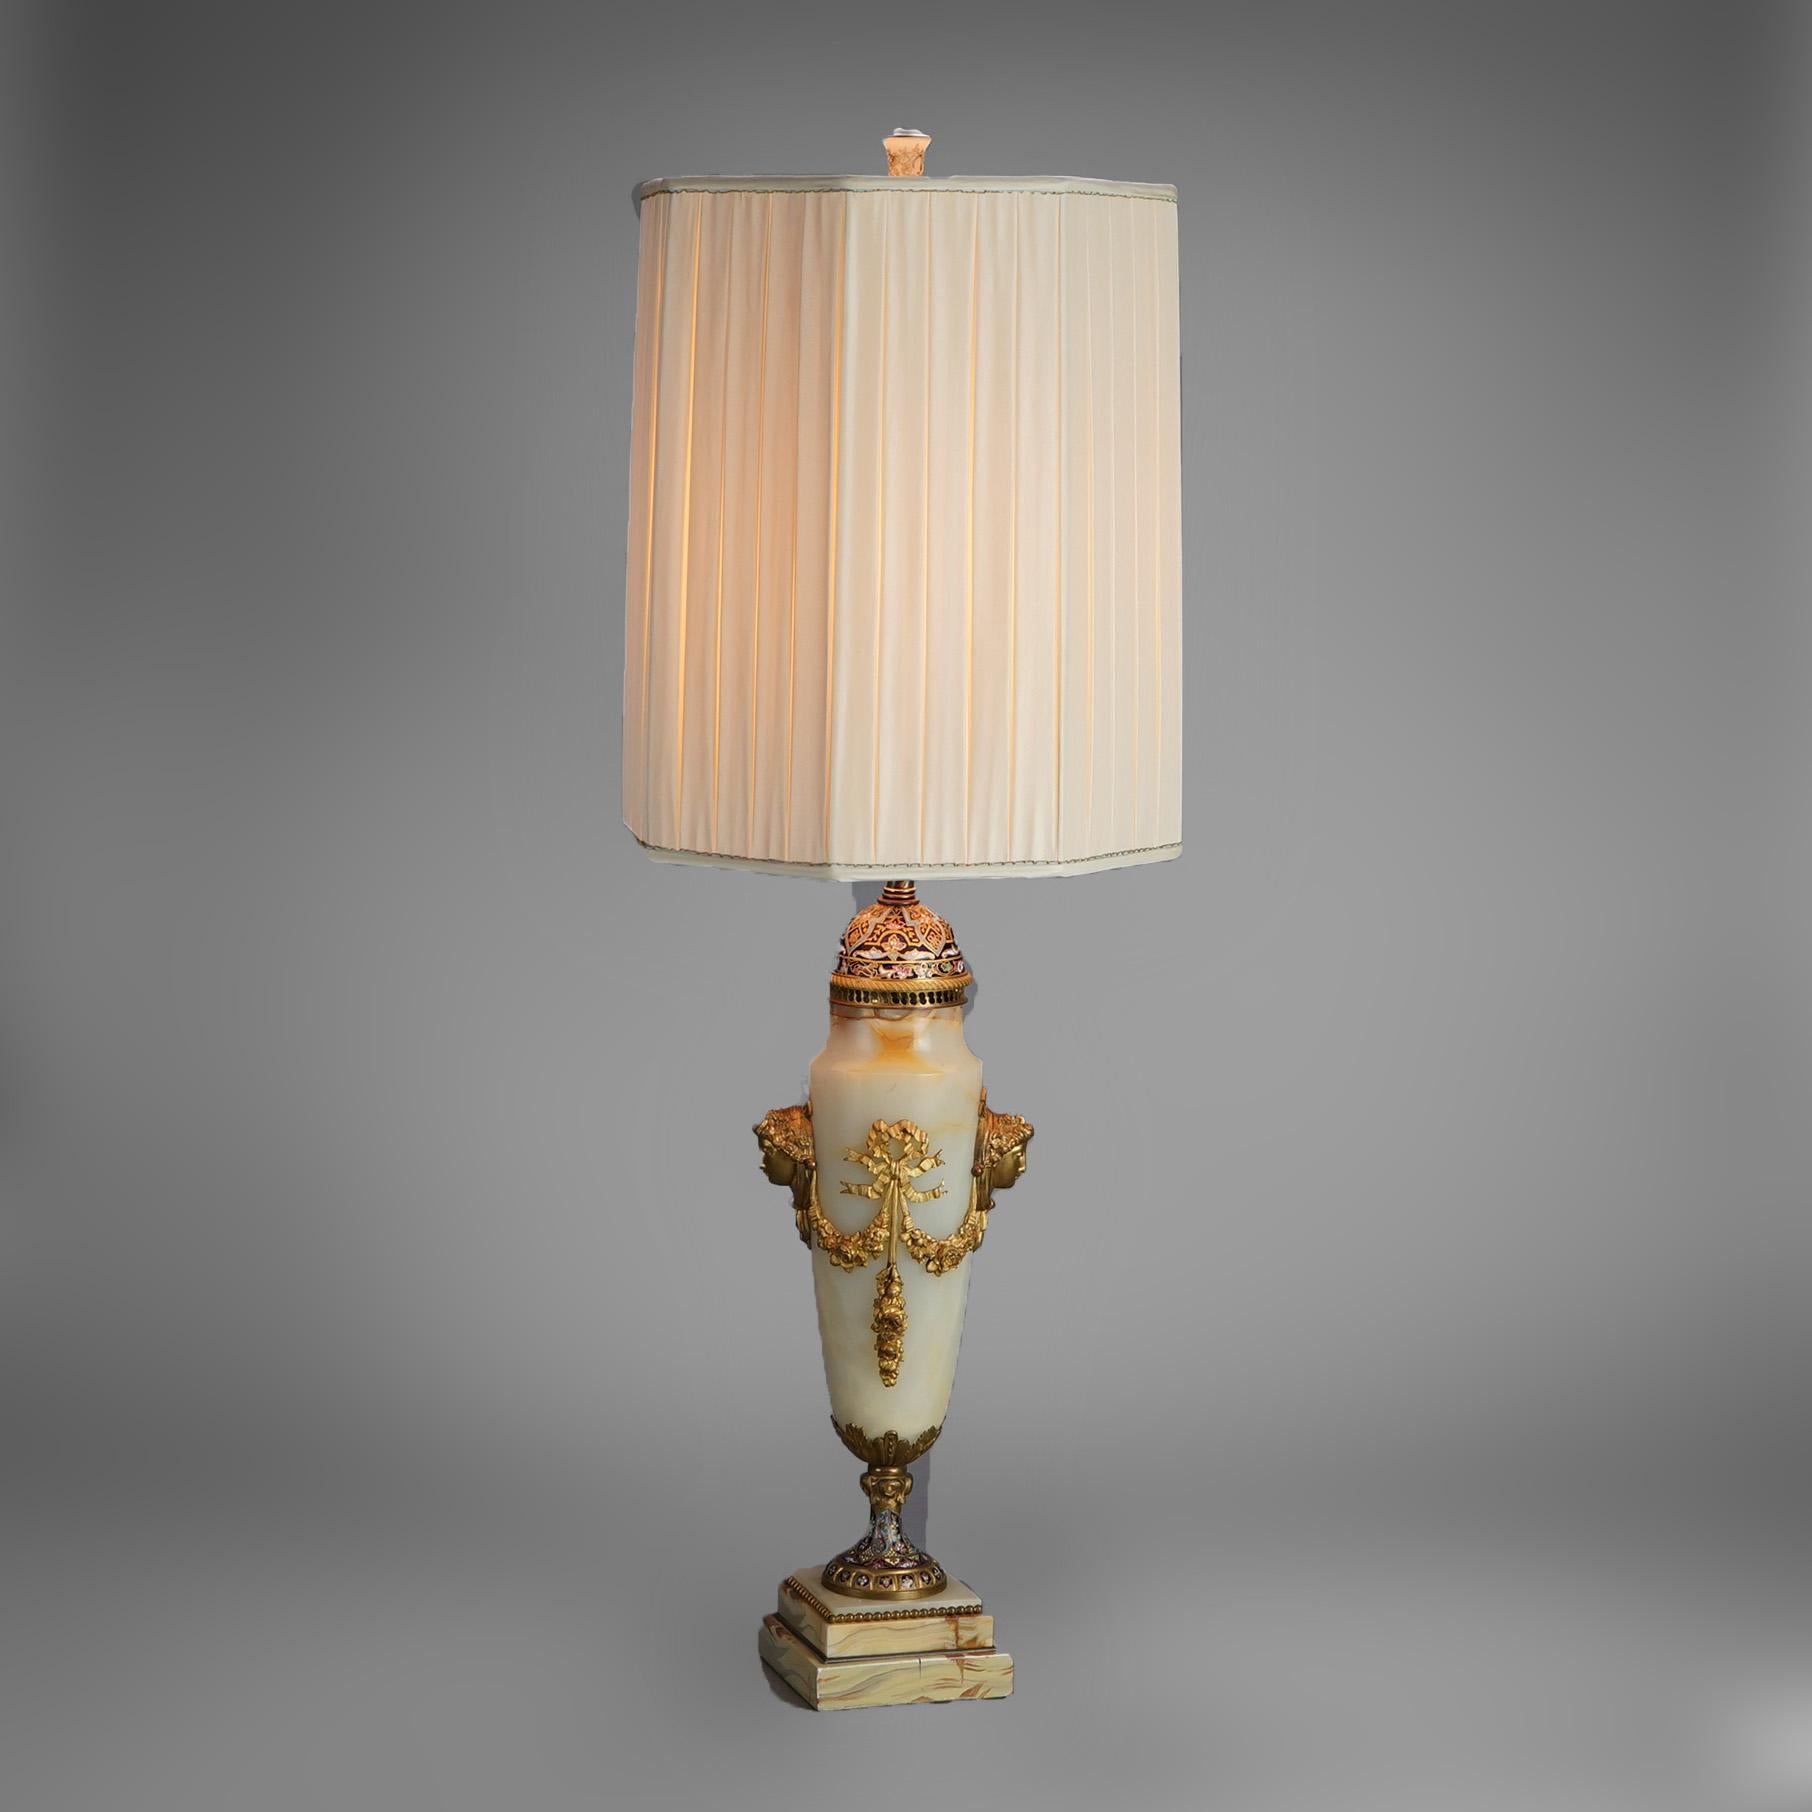 An antique French table lamp offers onyx urn form bodice having Neoclassical cast ormolu foliate and female mask mounts, raised on champleve enameled base, wired for US electricity, c1920

Measures- 36.5''H x 11.5''W x 11.5''D